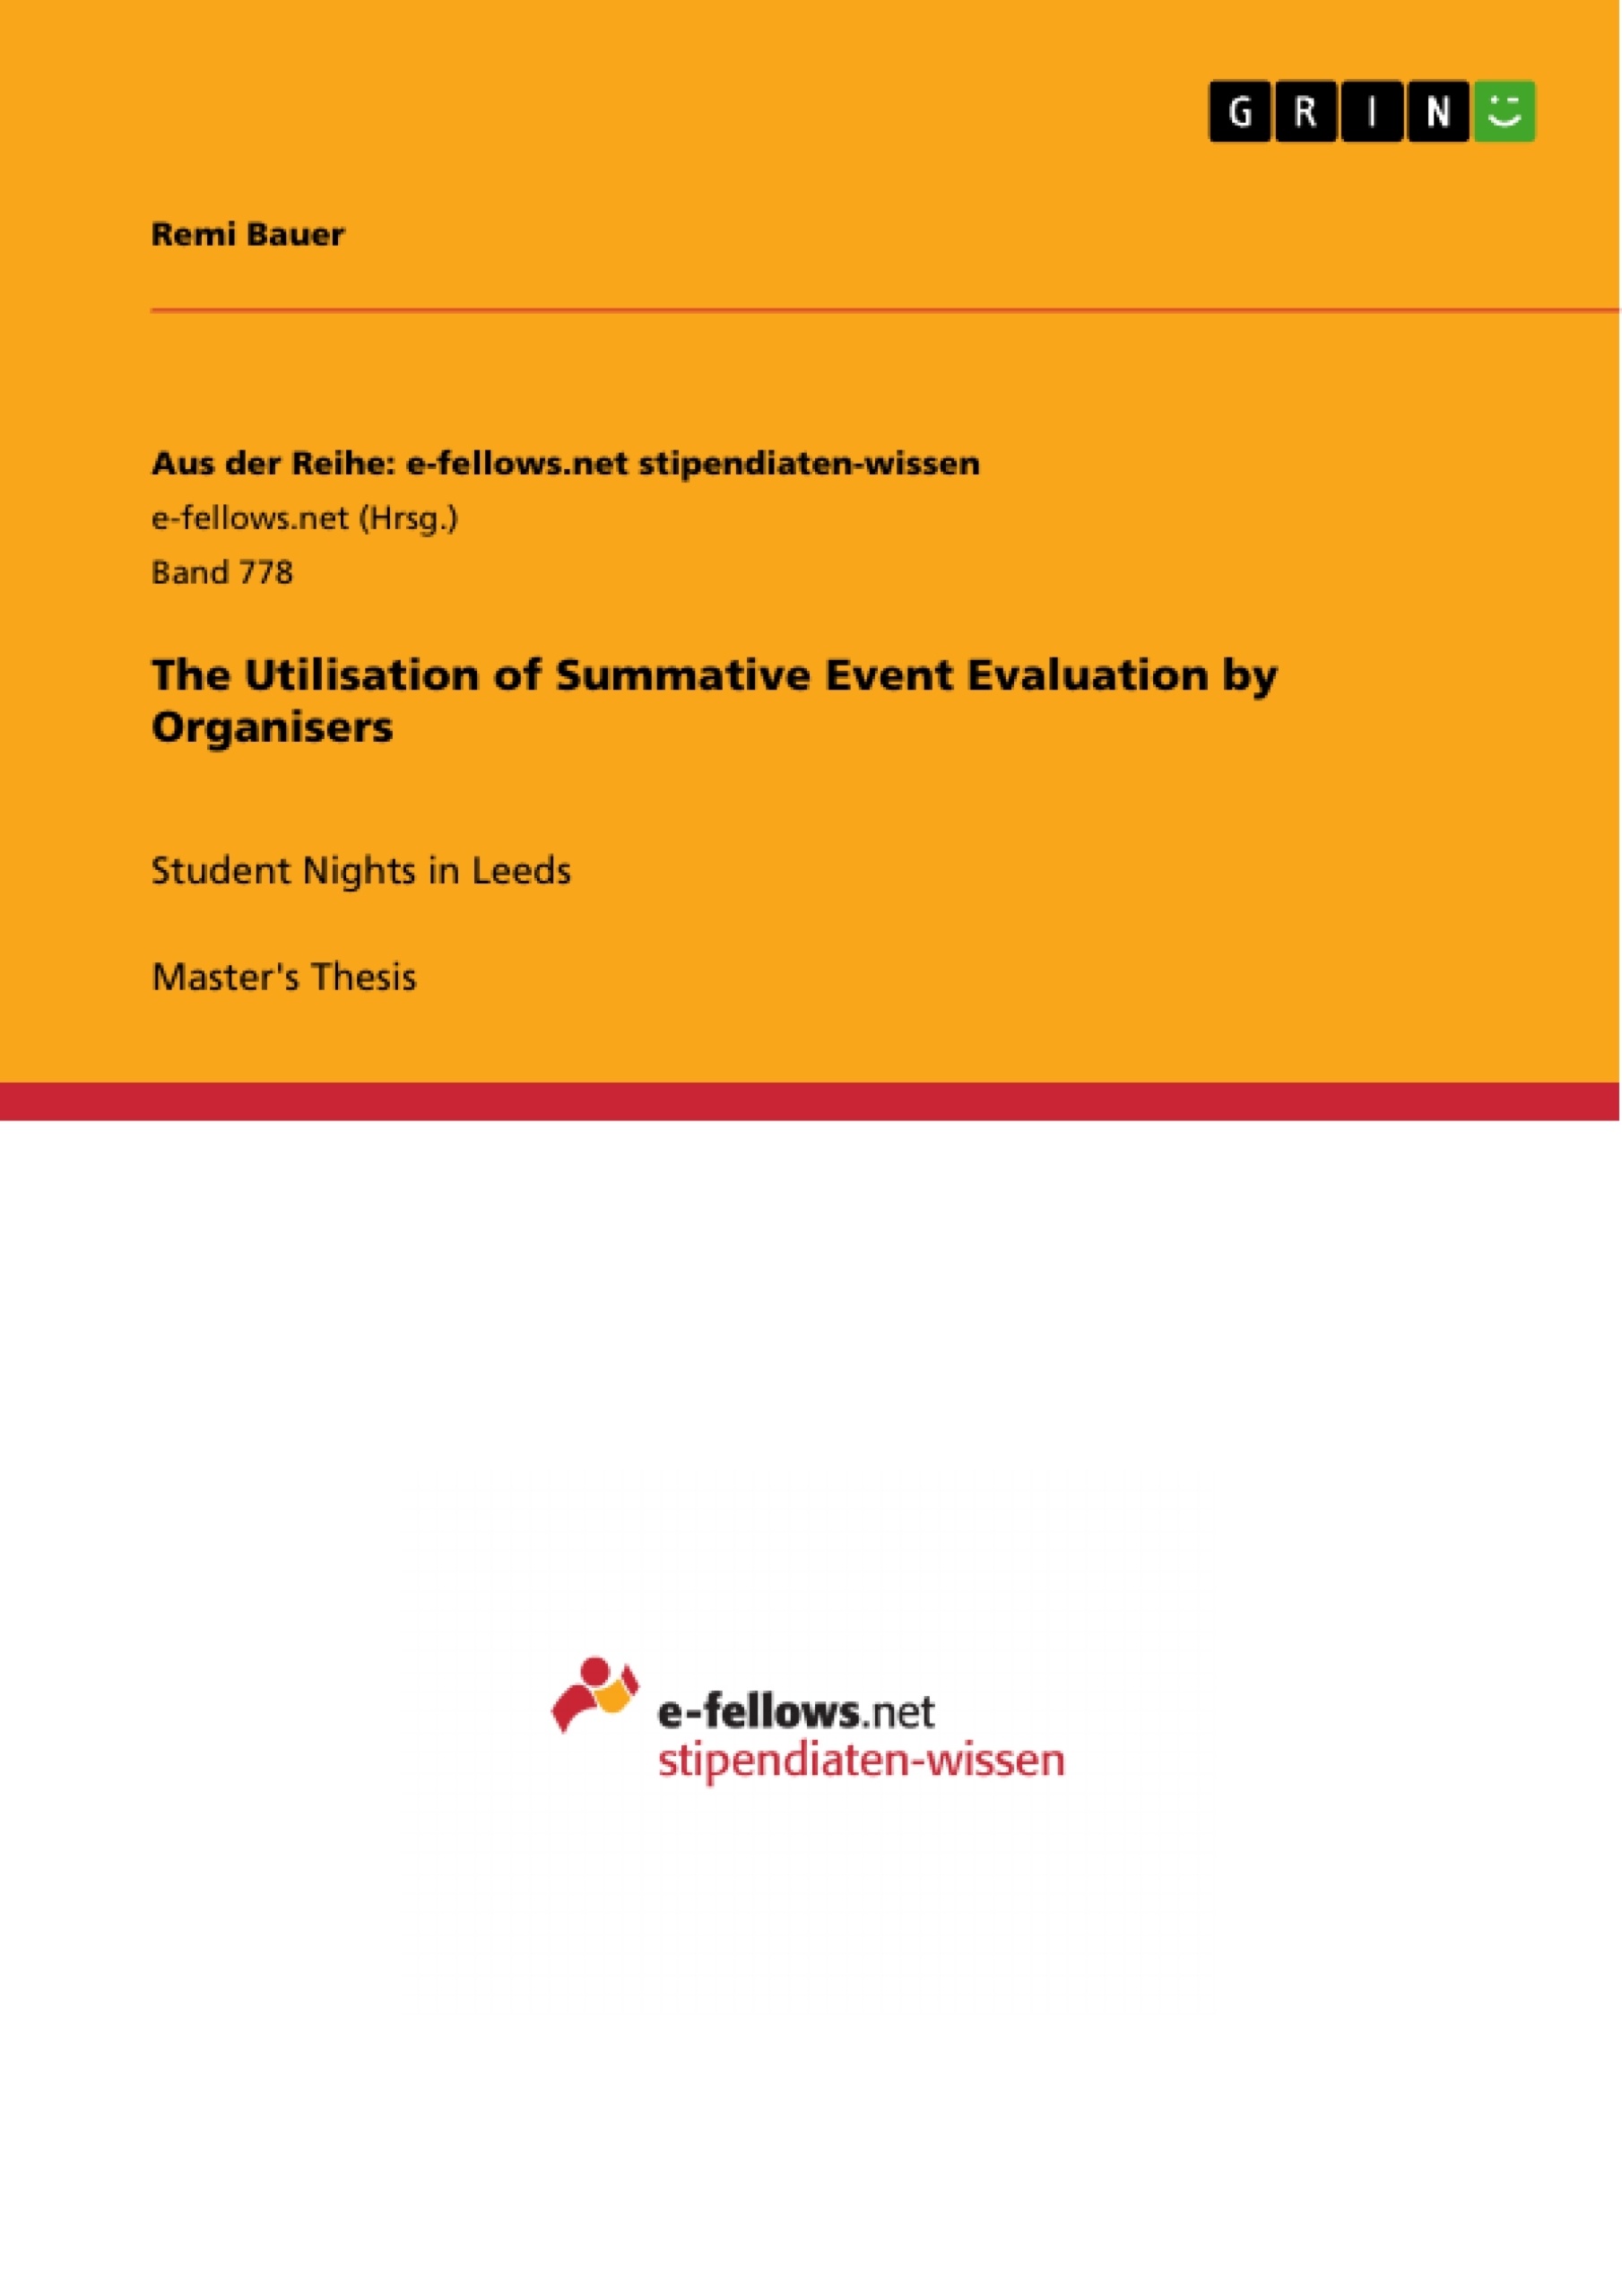 Title: The Utilisation of Summative Event Evaluation by Organisers